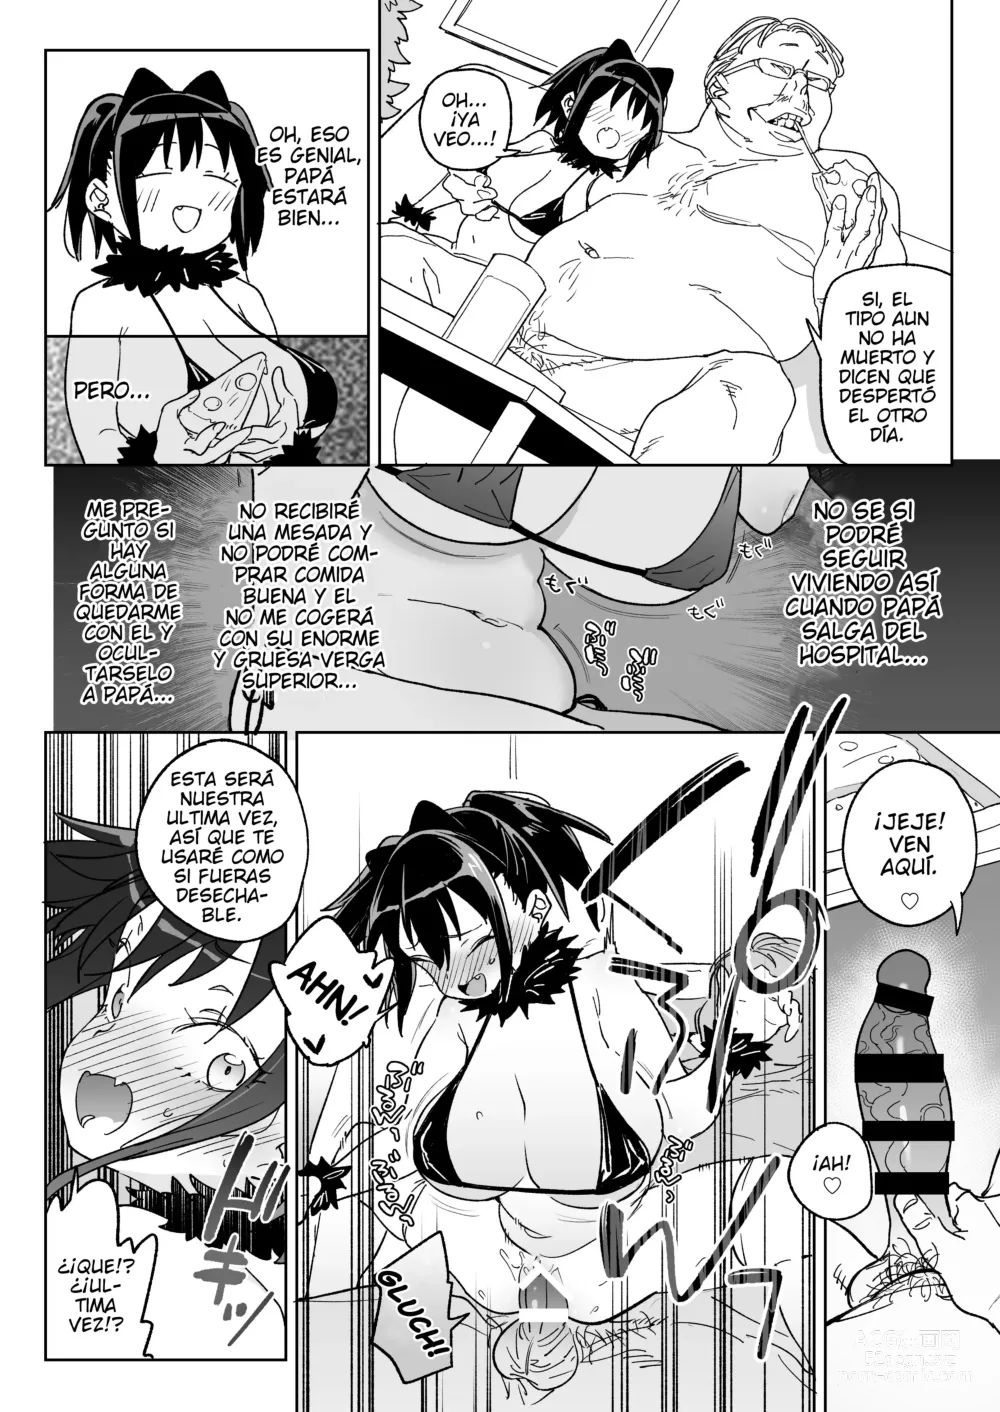 Page 31 of doujinshi November 28th: As of today, I belong to my new daddy!